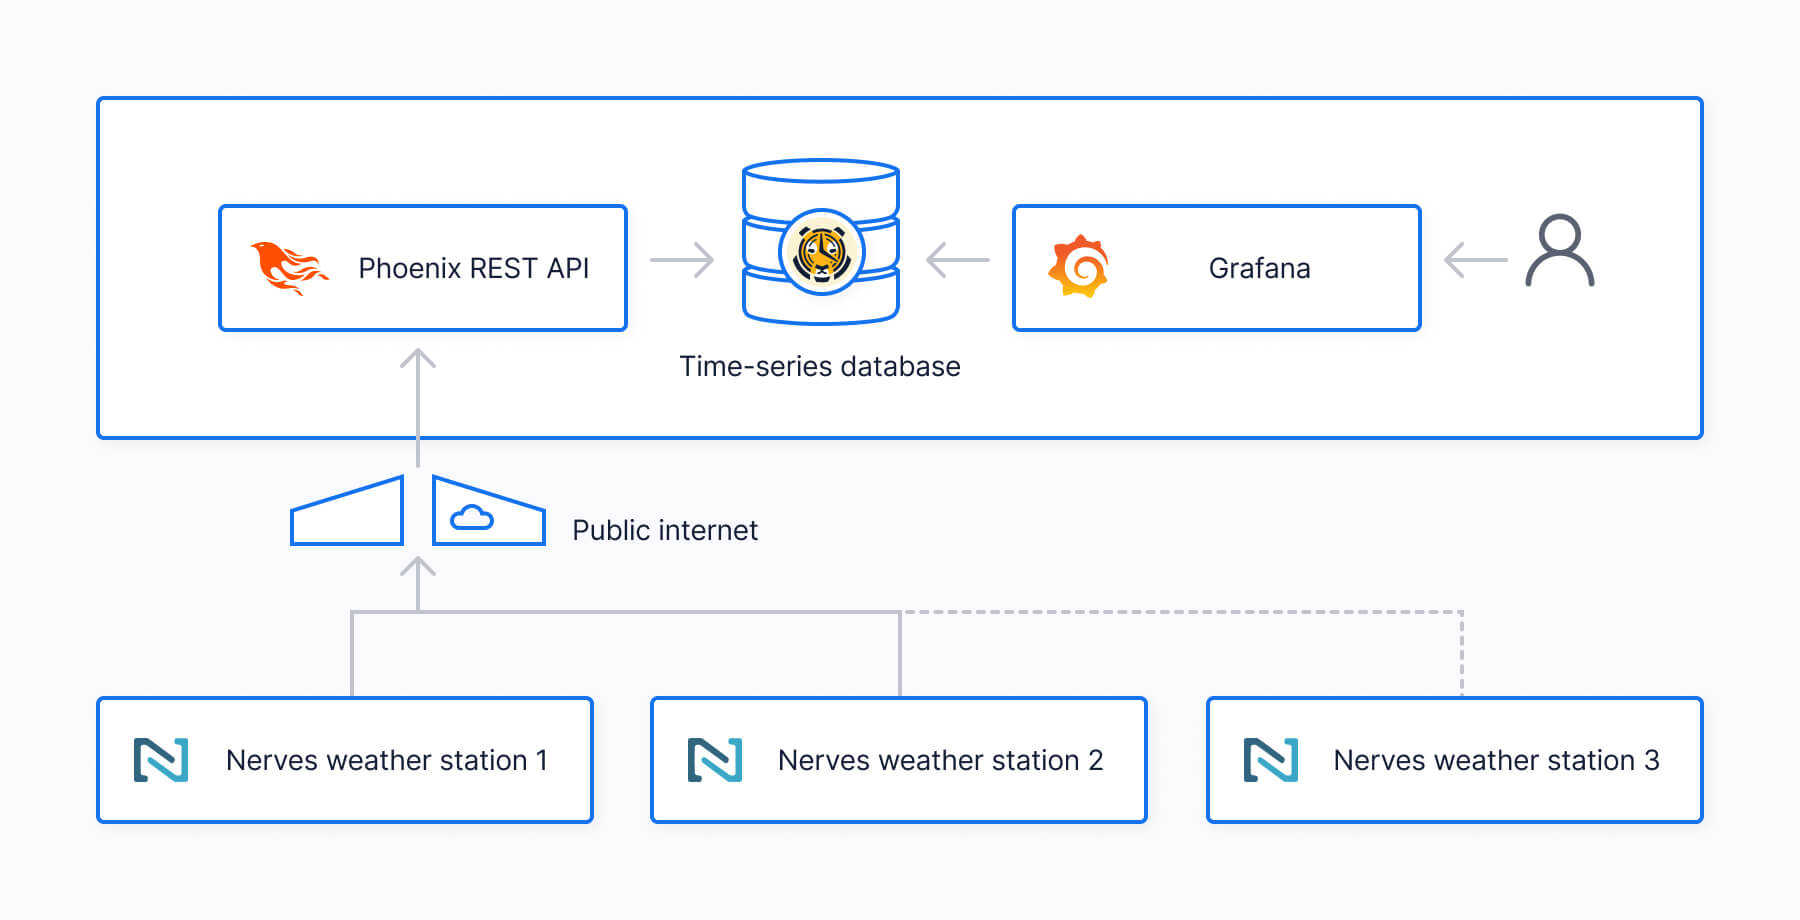 The architecture diagram of the weather station system shows how Grafana, TimescaleDB, Phoenix REST API, and various Nerves weather stations interact with each other. 